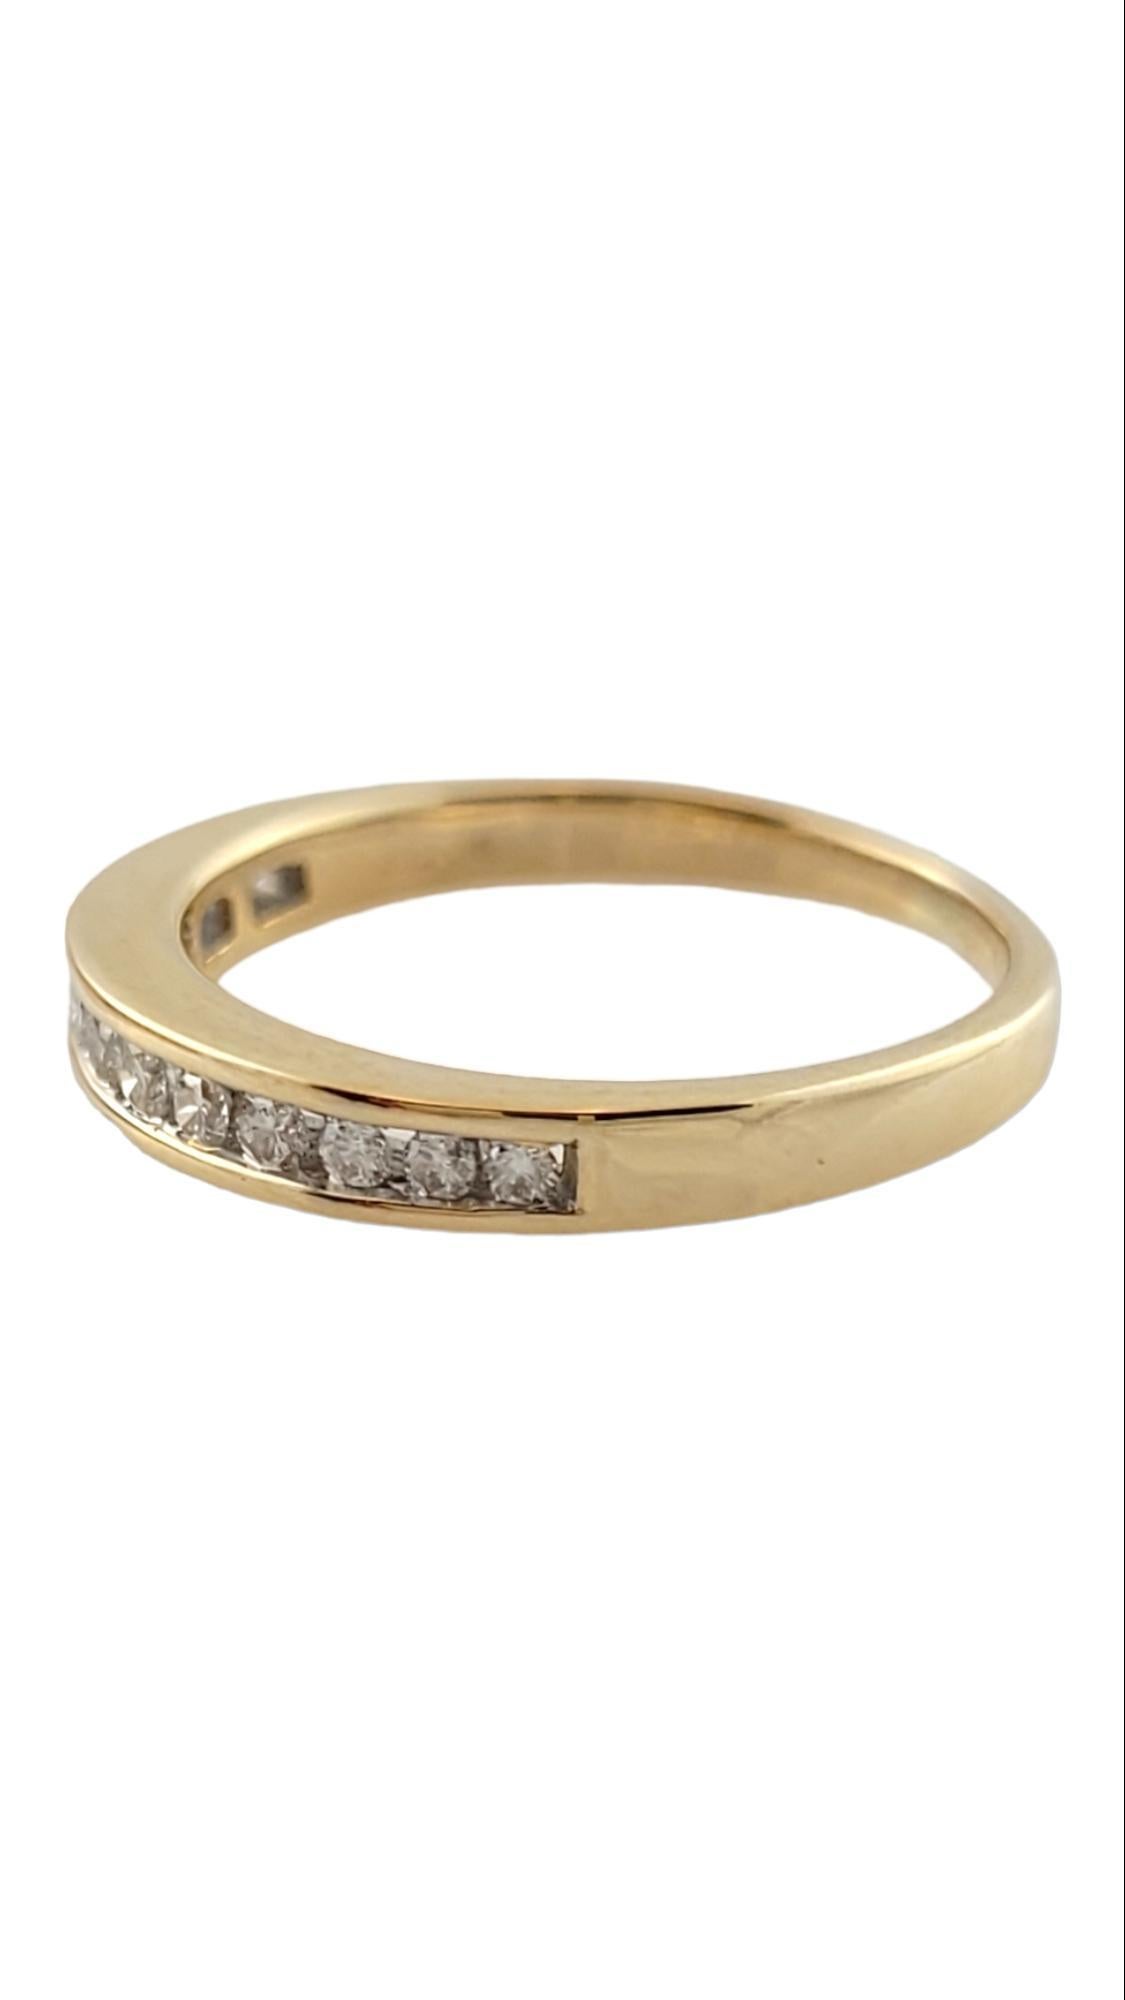 Vintage 14K Yellow Gold Diamond Band Size 6.25

13 gorgeous, sparkling round brilliant cut diamonds set in a 14K gold band!

Approximate total diamond weight: .20 cts

Diamond color: I

Diamond clarity: I1-I2

Ring size: 6.25
Shank: 1.8mm

Weight: